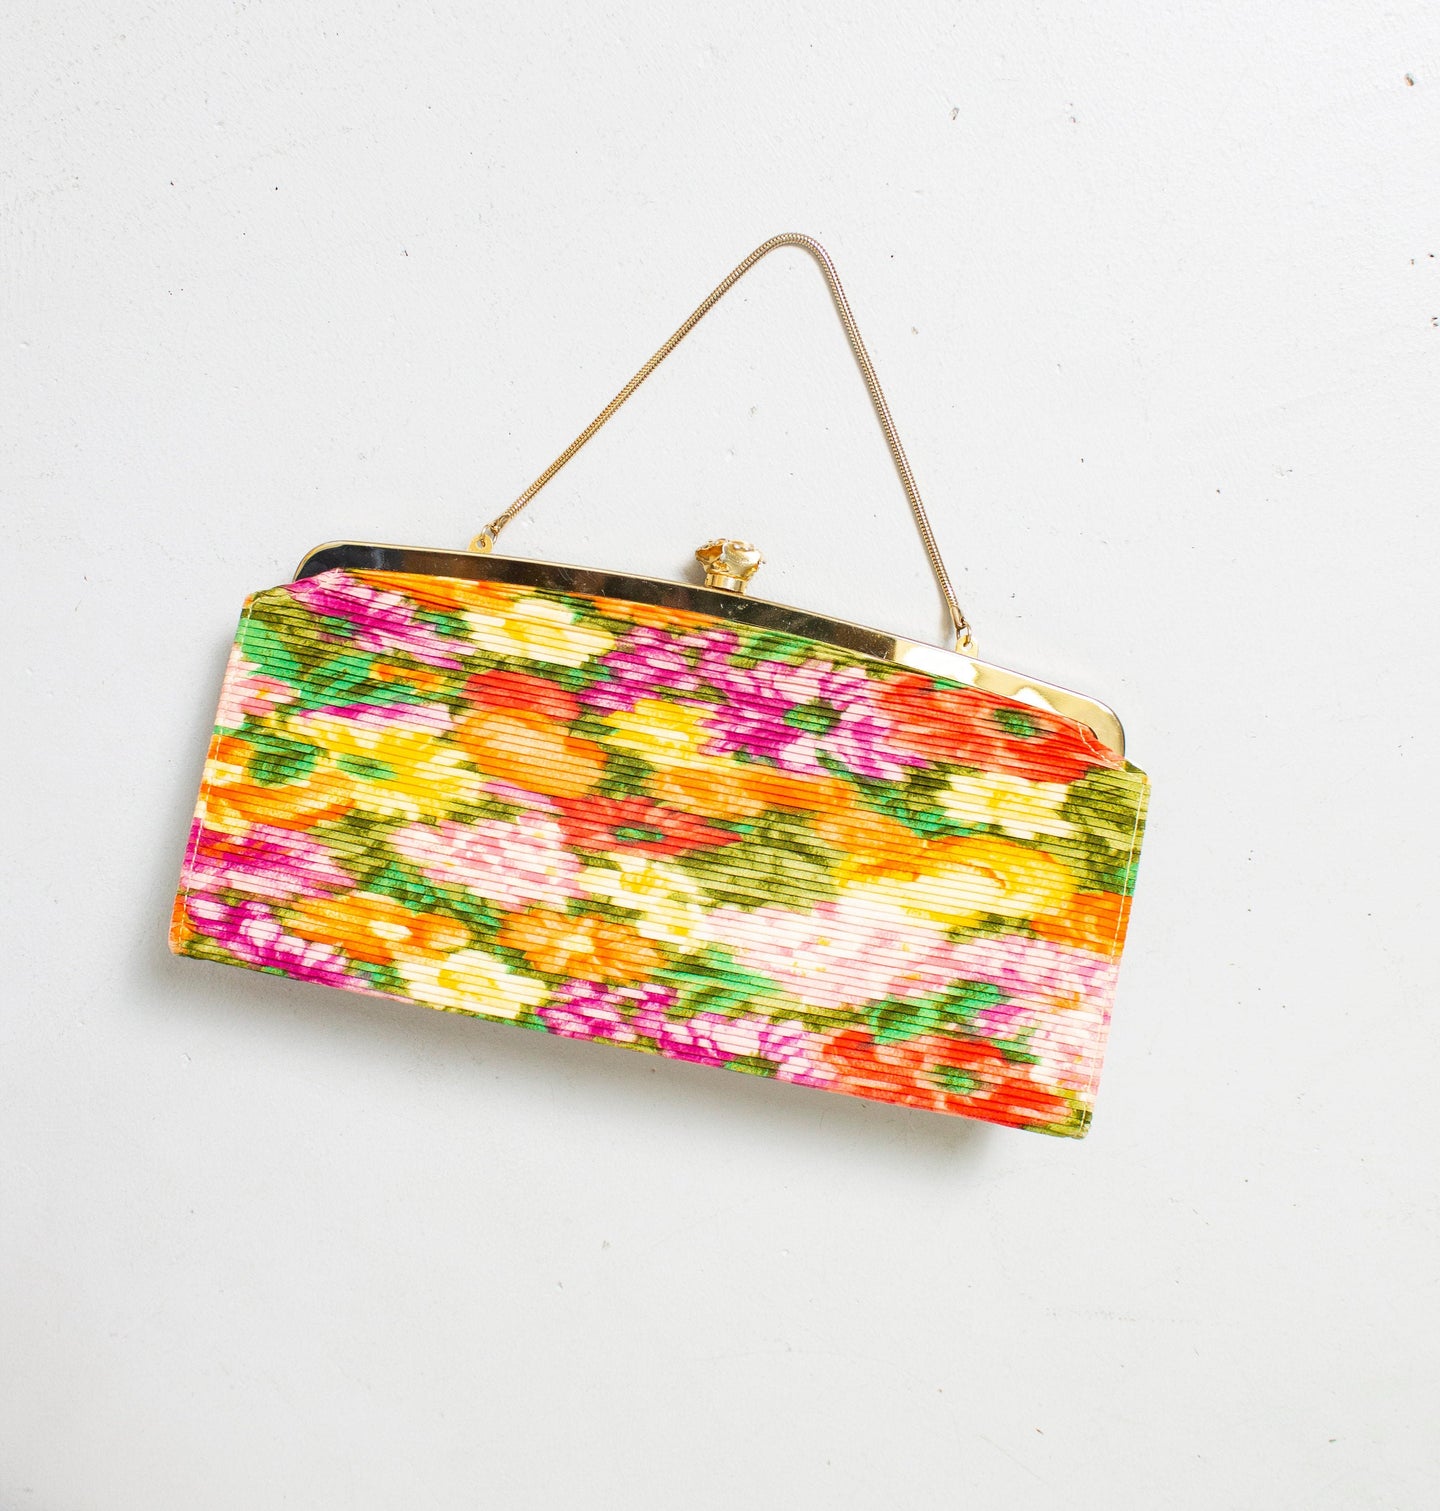 1960s Purse Floral Fabric Gold Flower Clasp Cocktail Evening Bag 60s